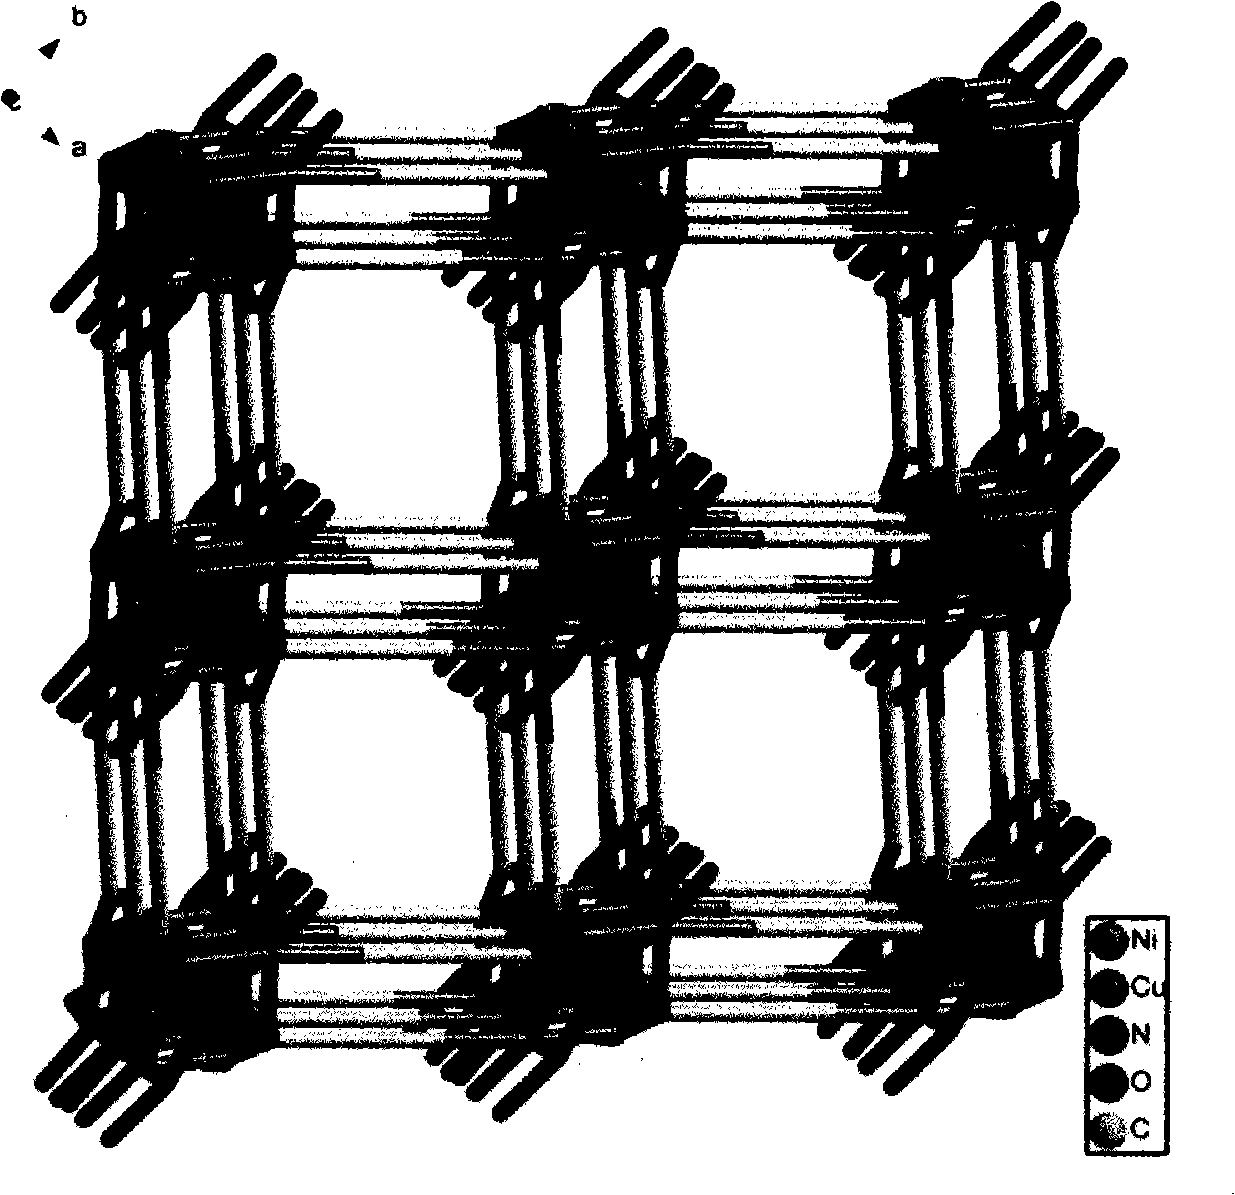 Three-dimensional nitrine copper-nickel coordination compound and method of preparing the same